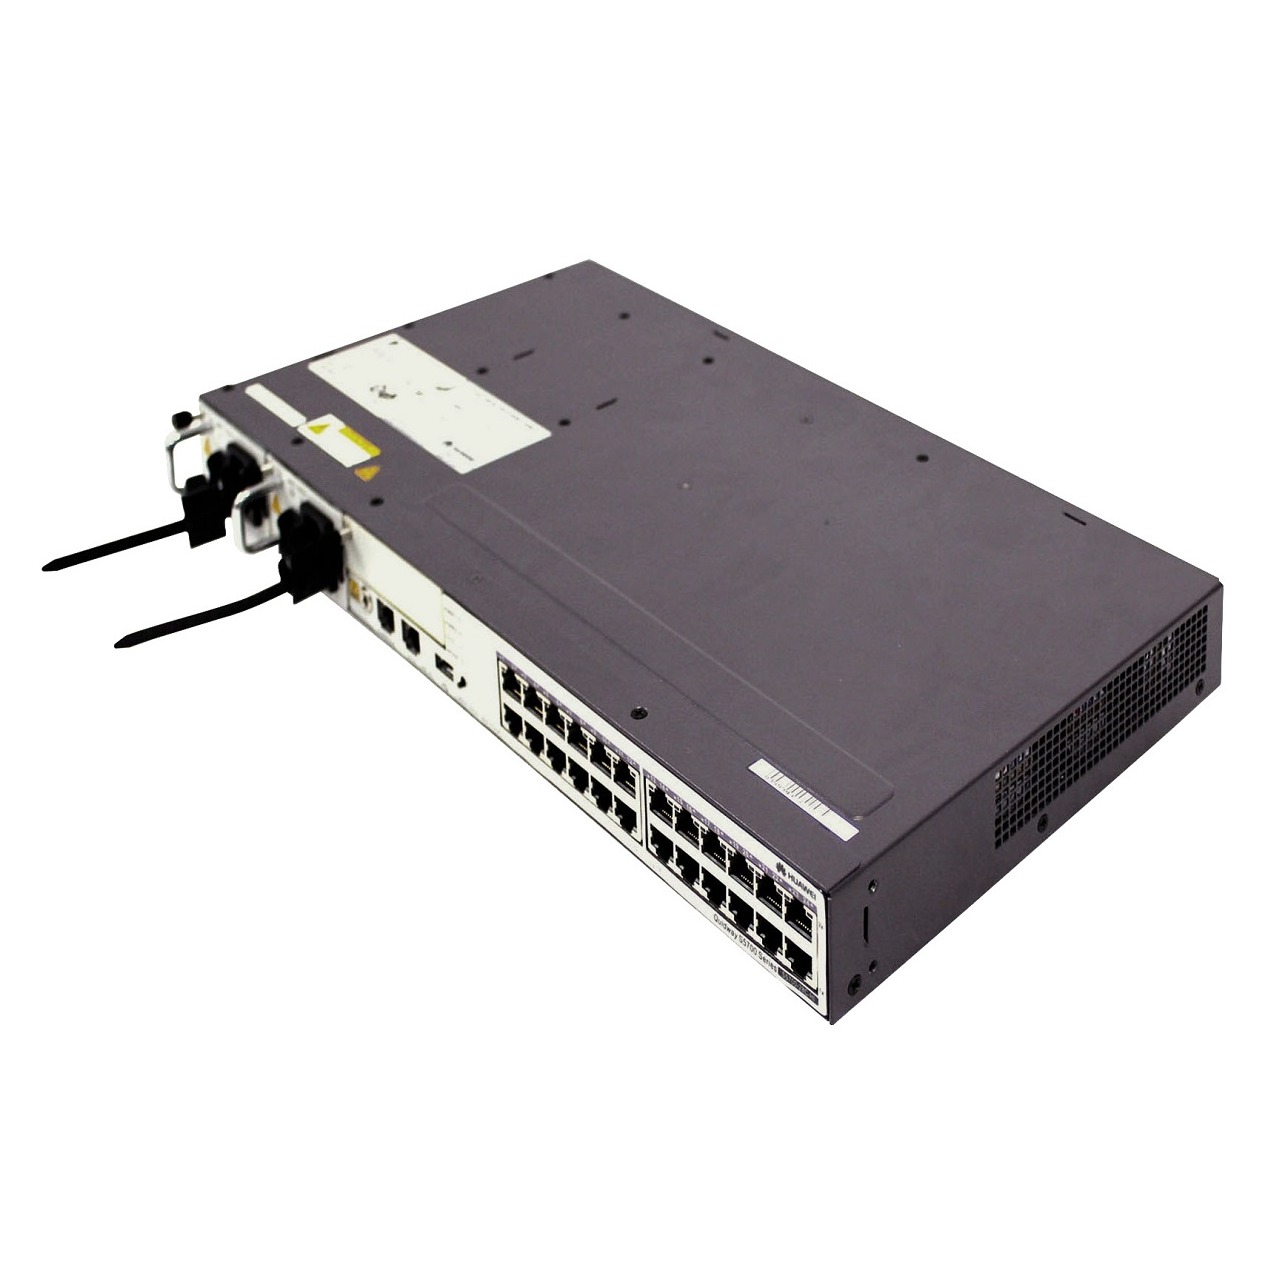 S5700-28C-HI Bundle(24 Ethernet 10/100/1000 ports.with 1 interface slot.with 170W AC power supply).